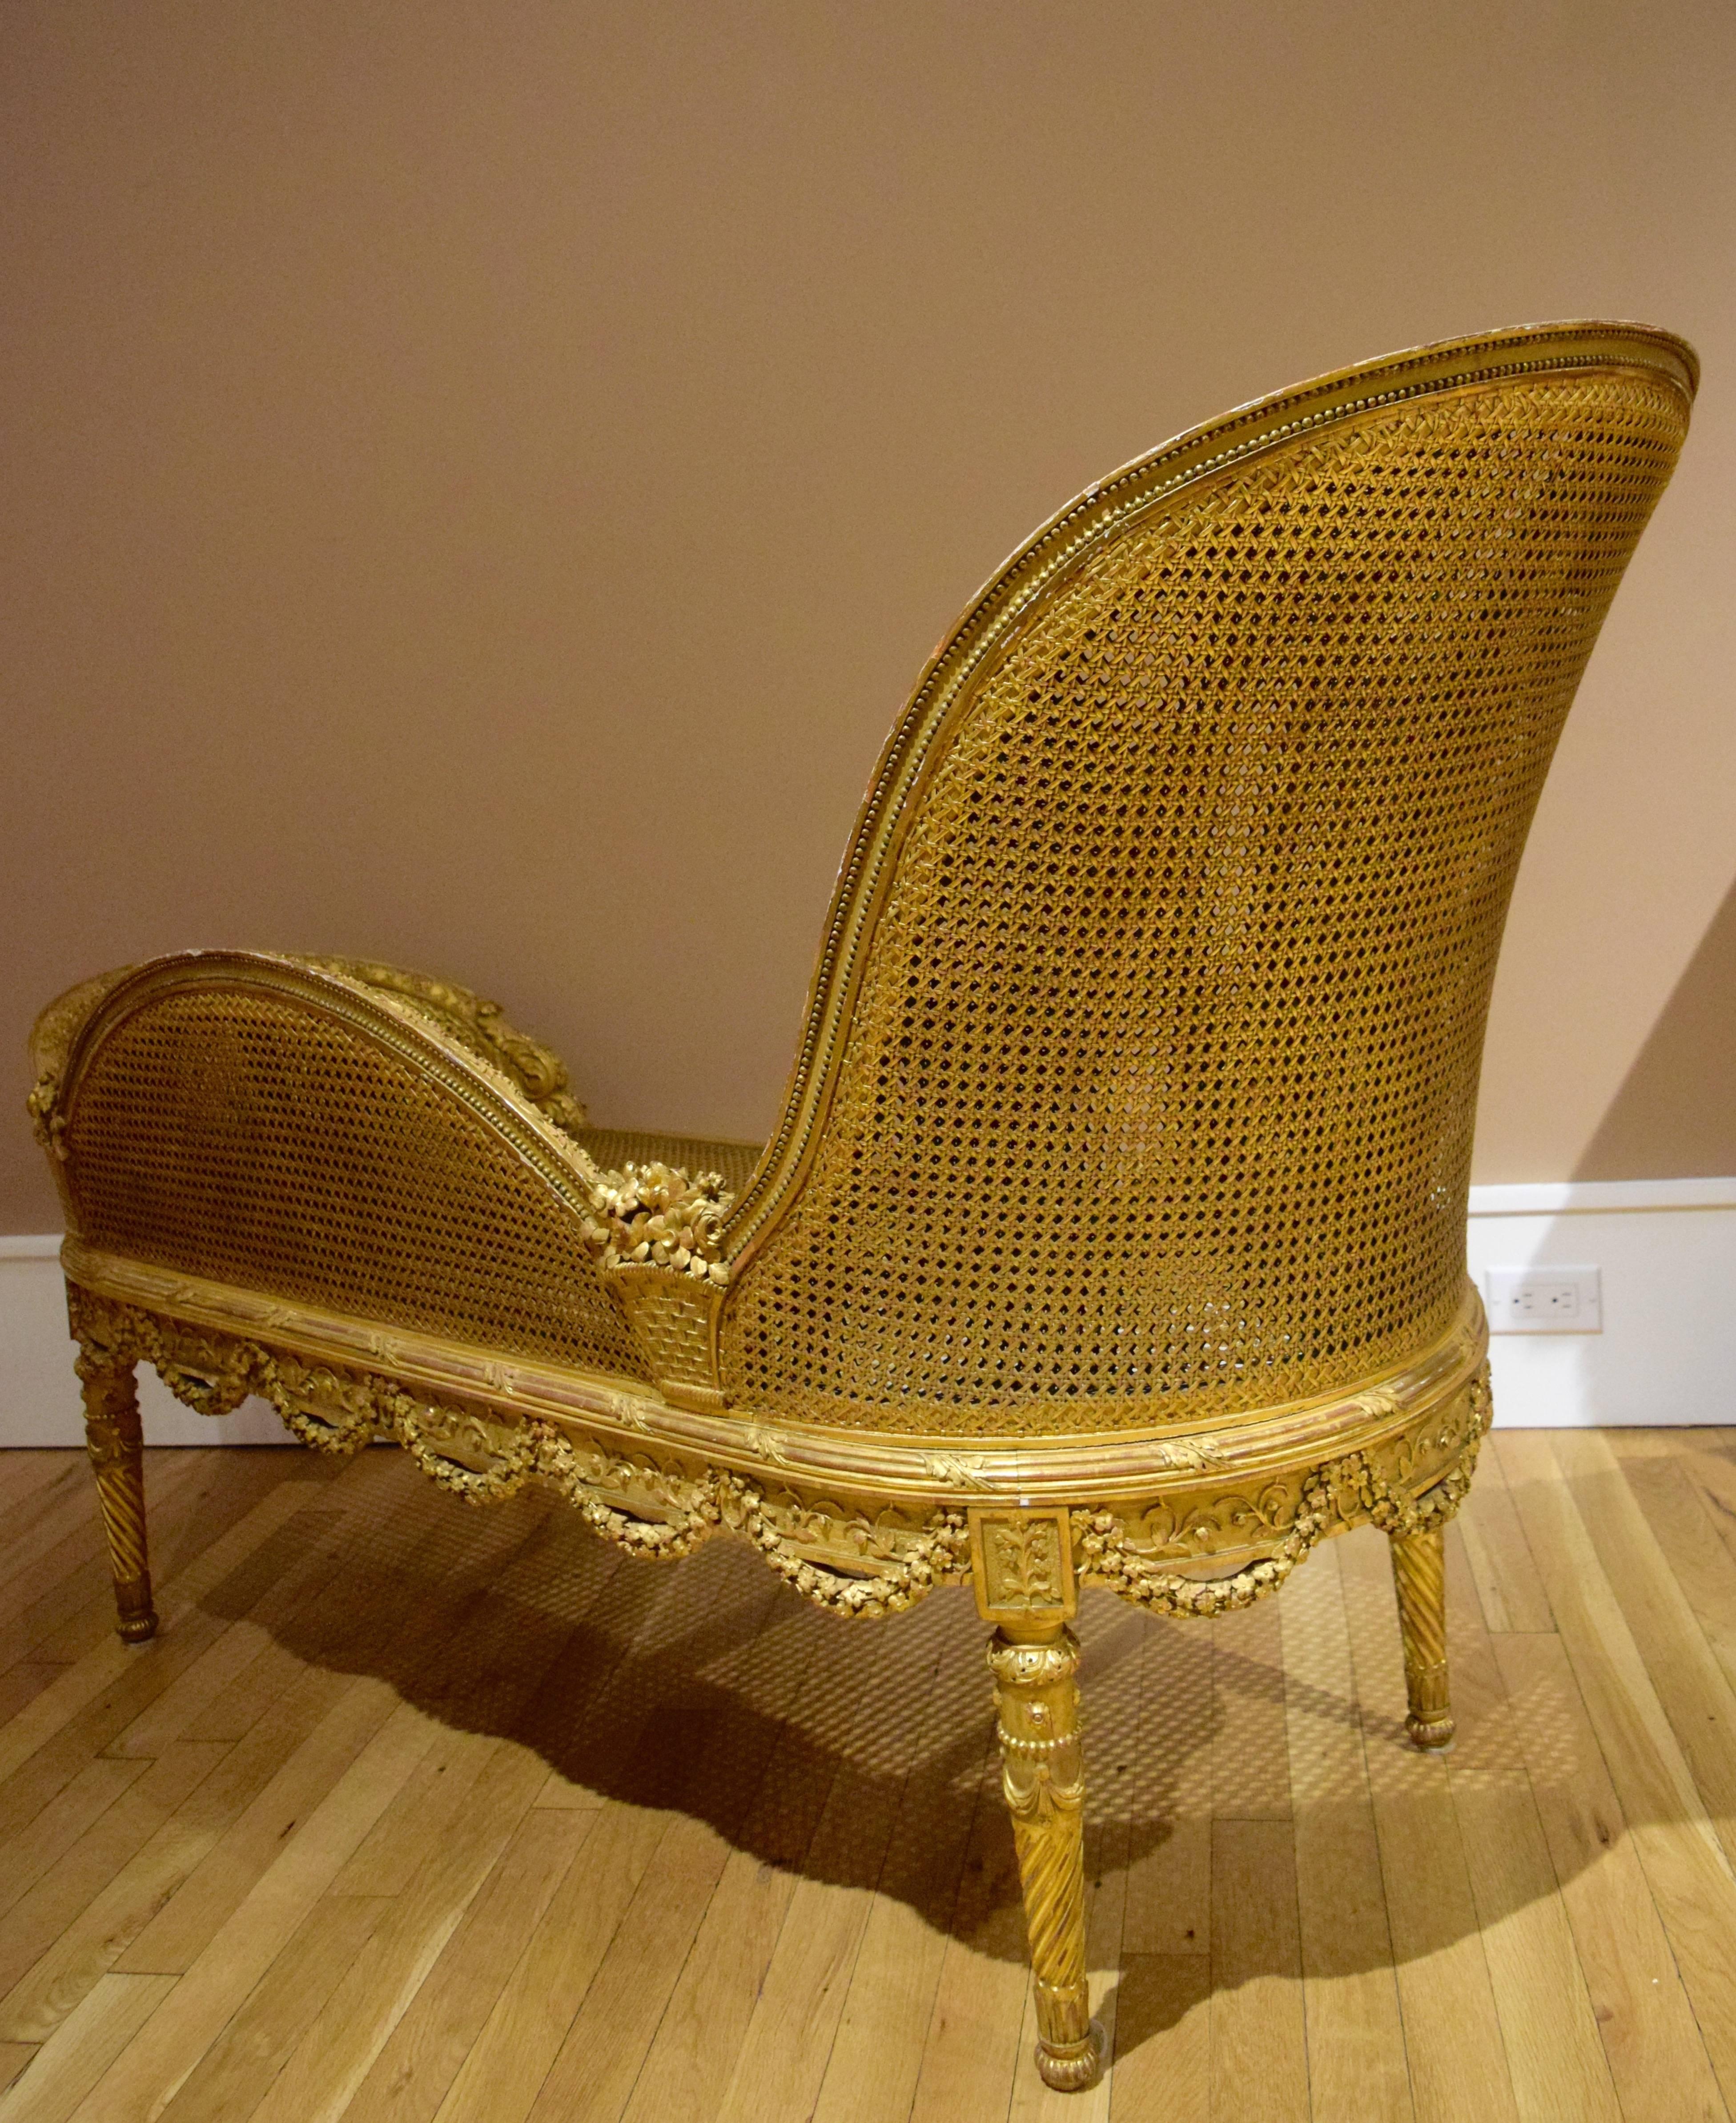 French Belle Epoque Giltwood Chaise Longue Circa 1900